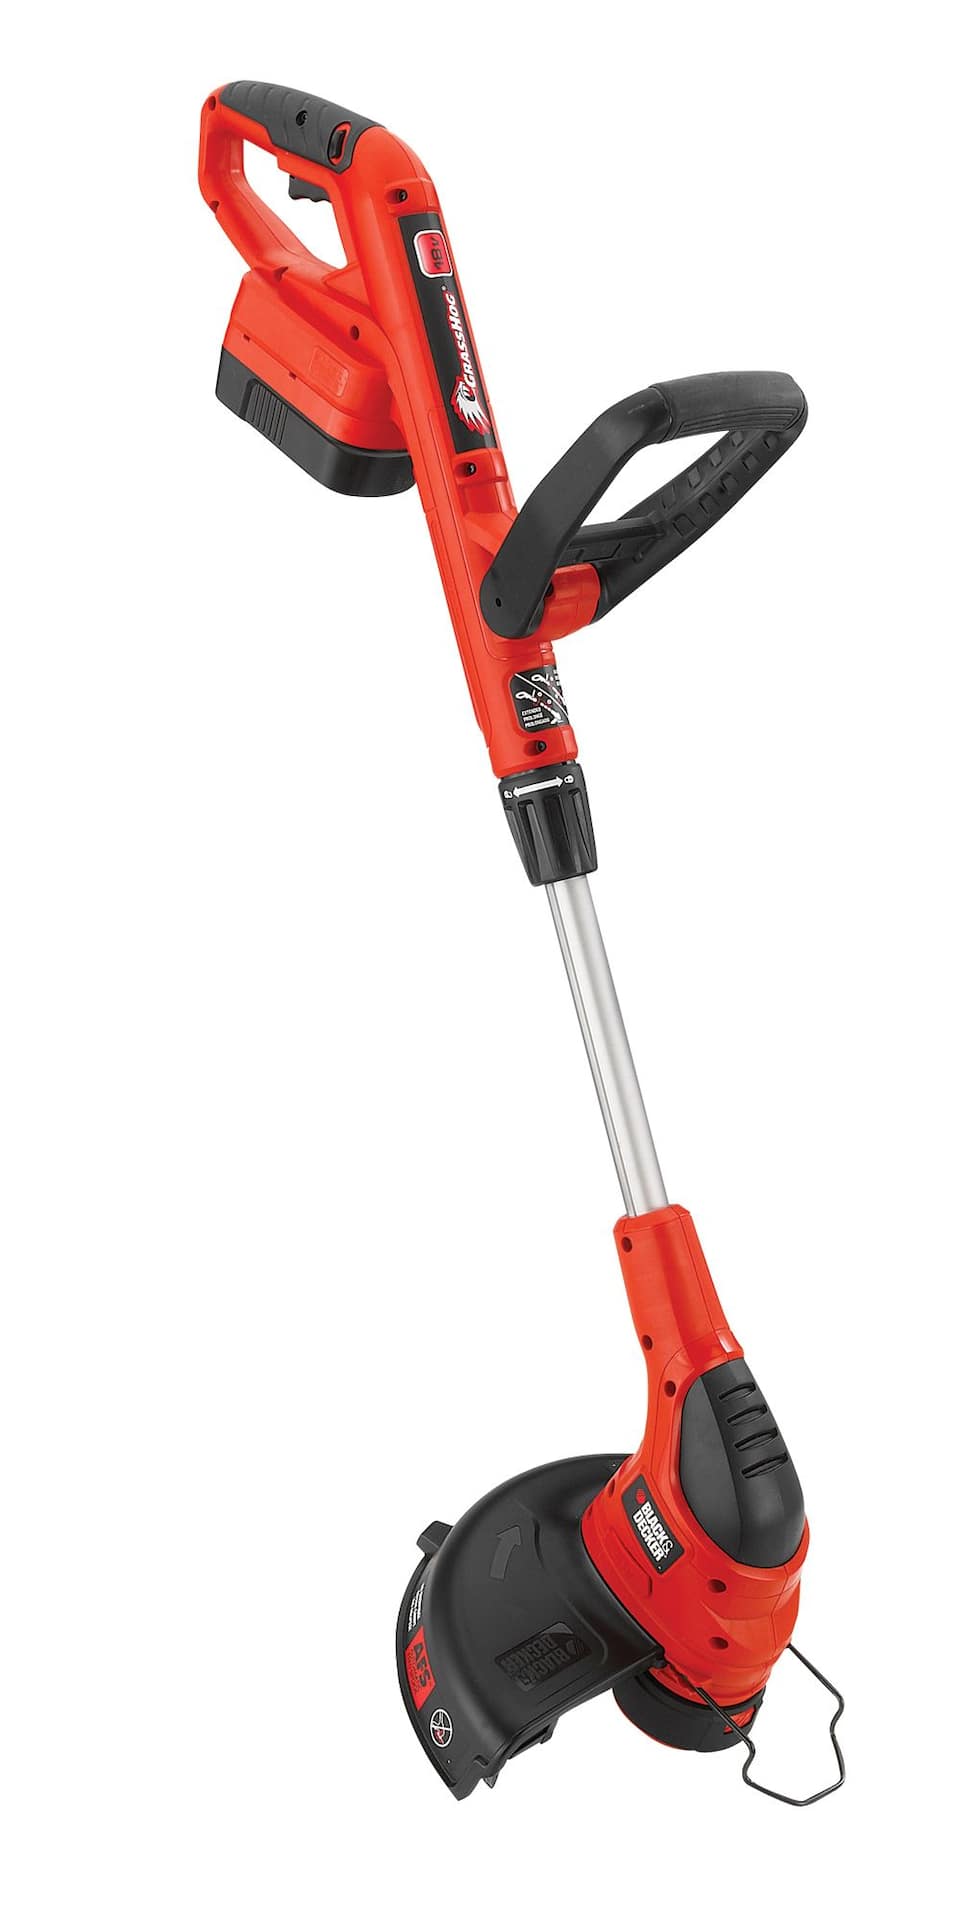 https://media-www.canadiantire.ca/product/seasonal-gardening/outdoor-tools/hand-held-outdoor-power-tools/0602285/black-decker-18vcordless-grass-trimmer-c6f5ba25-5468-4f4c-afeb-a46e083f0eb8-jpgrendition.jpg